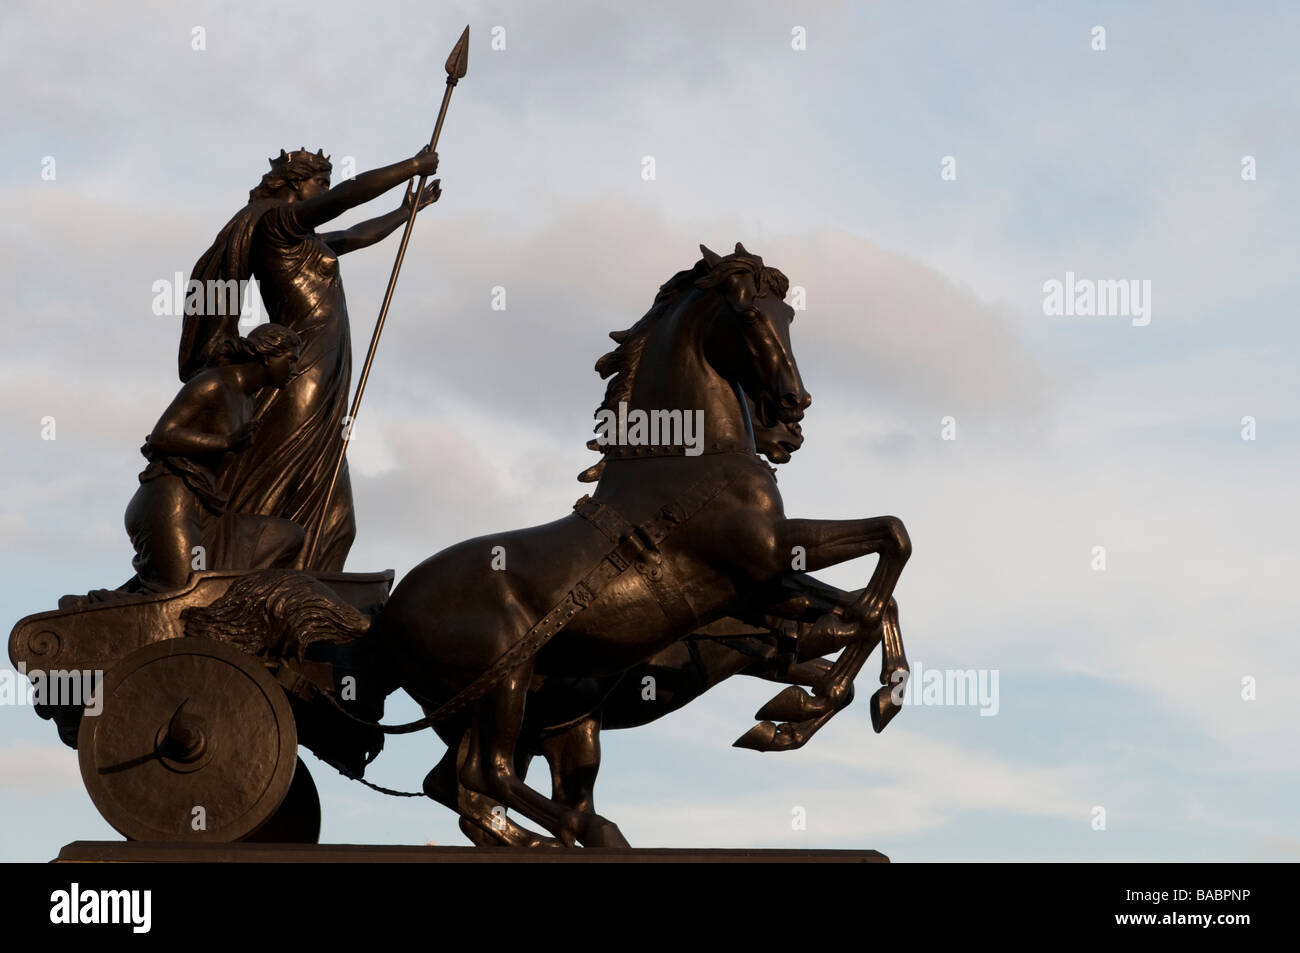 Statue of Boudica near Westminster Pier pulled by horses on a chariot, London, England, UK Stock Photo